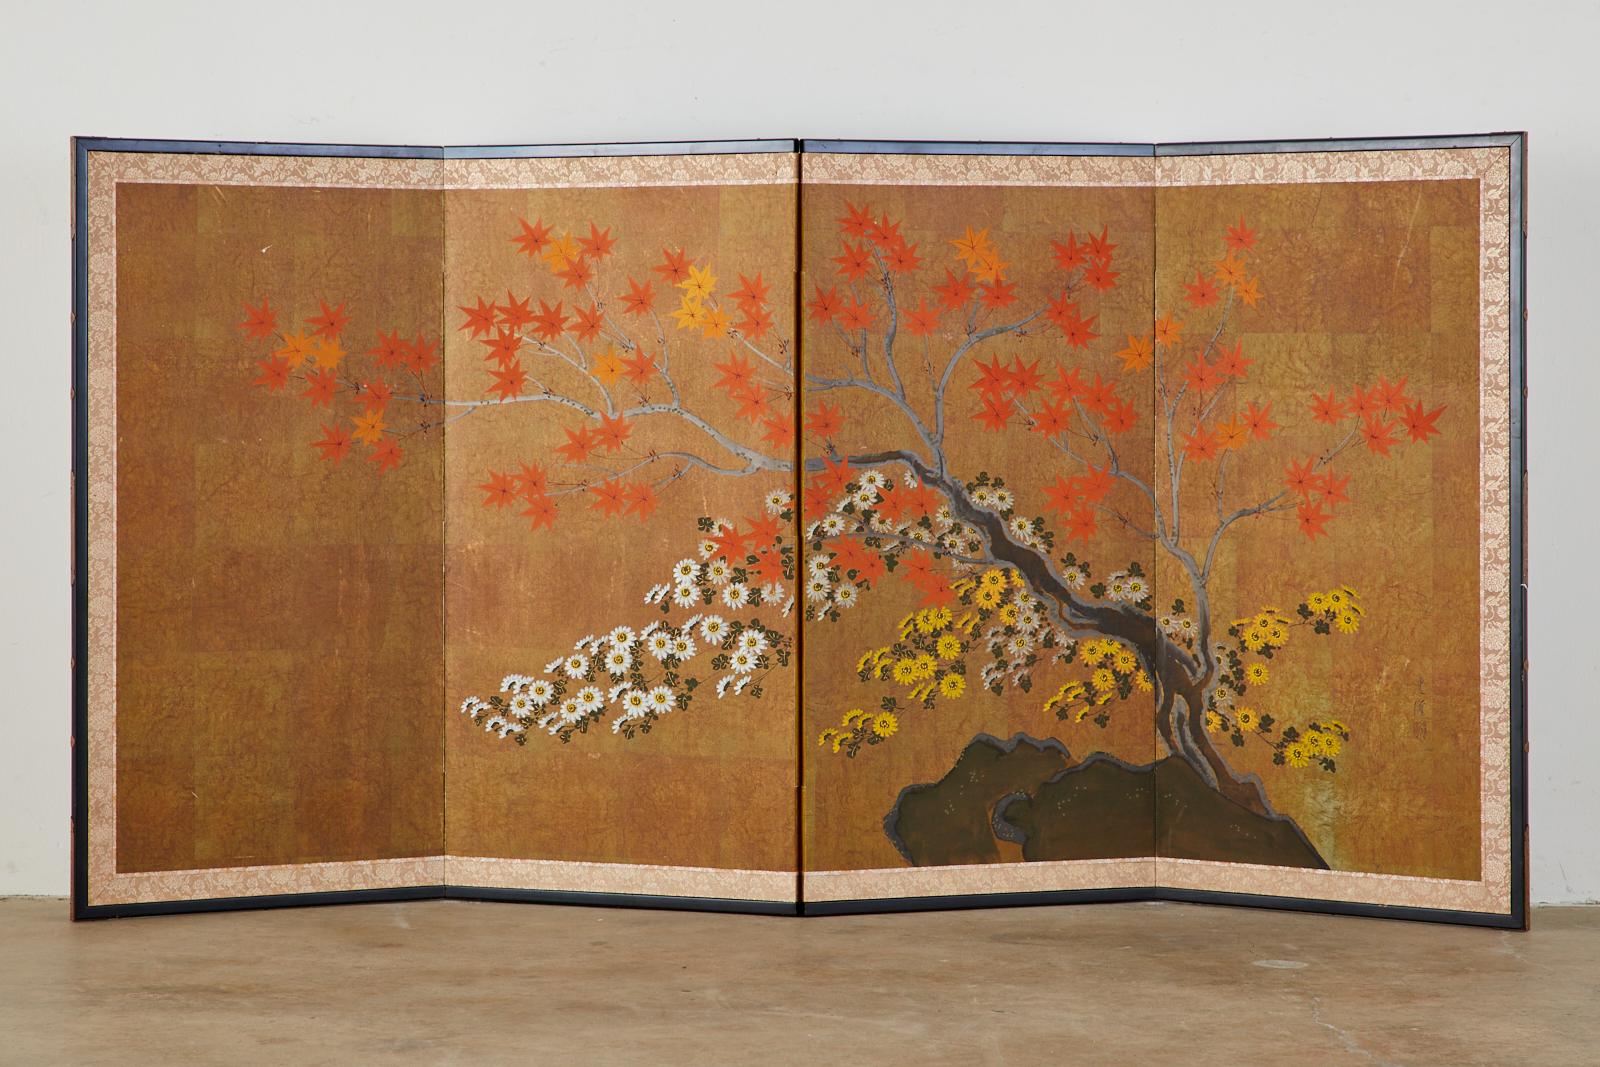 Colorful Japanese four-panel Showa period screen depicting a Japanese maple (Momiji) and flowering Chrysanthemums in autumn, ink and color pigments on gold paper. Made in the Nihonga School style. Set in an ebonized wood frame with a silk brocade